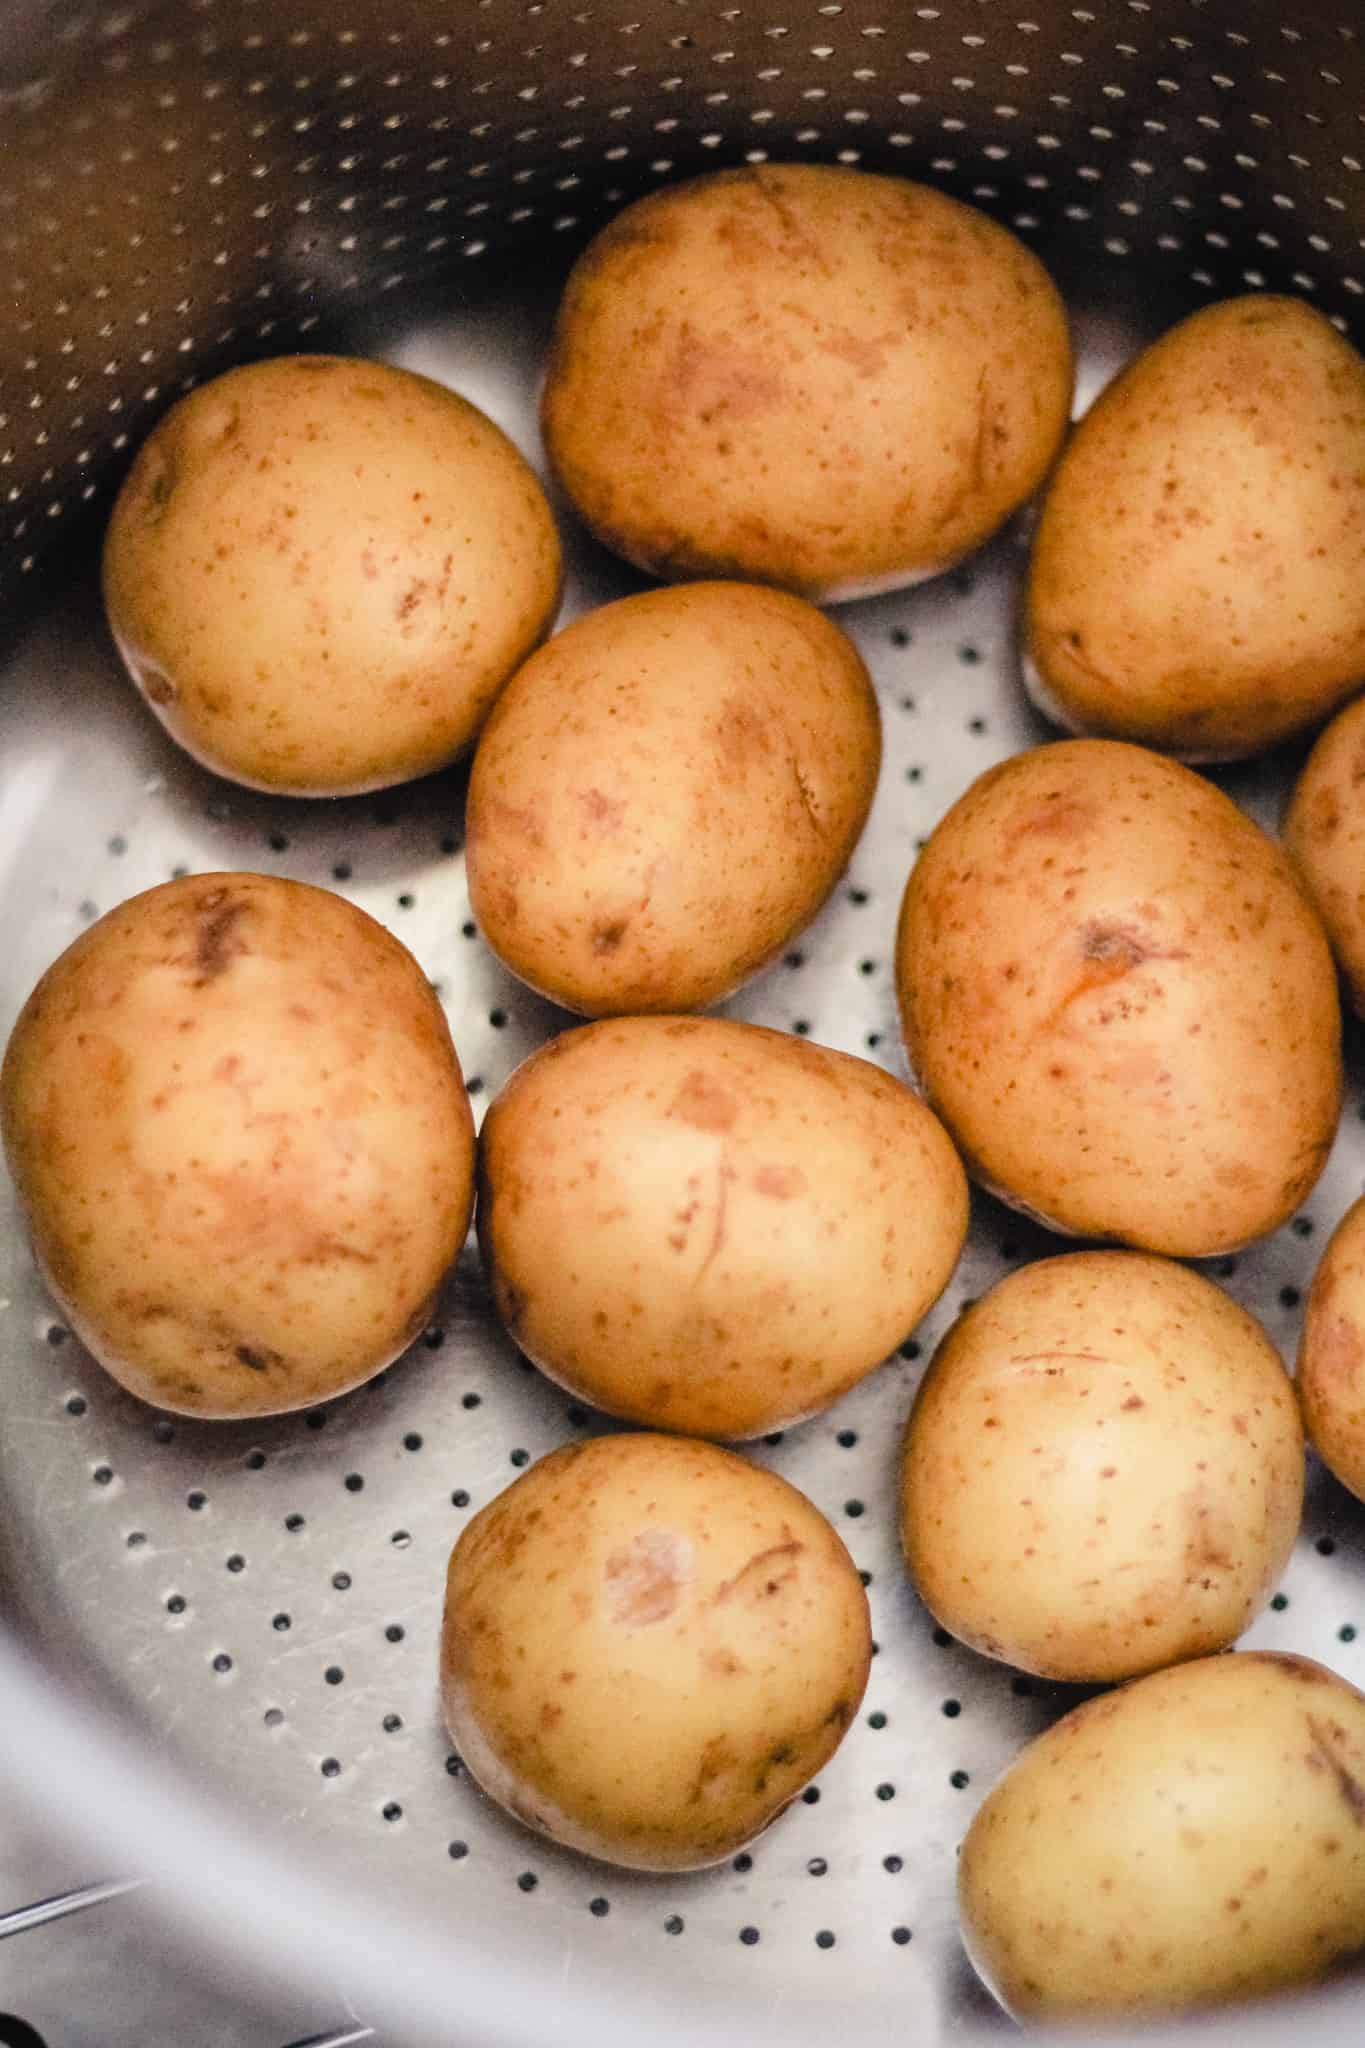 Baby gold potatoes in a strainer pot.